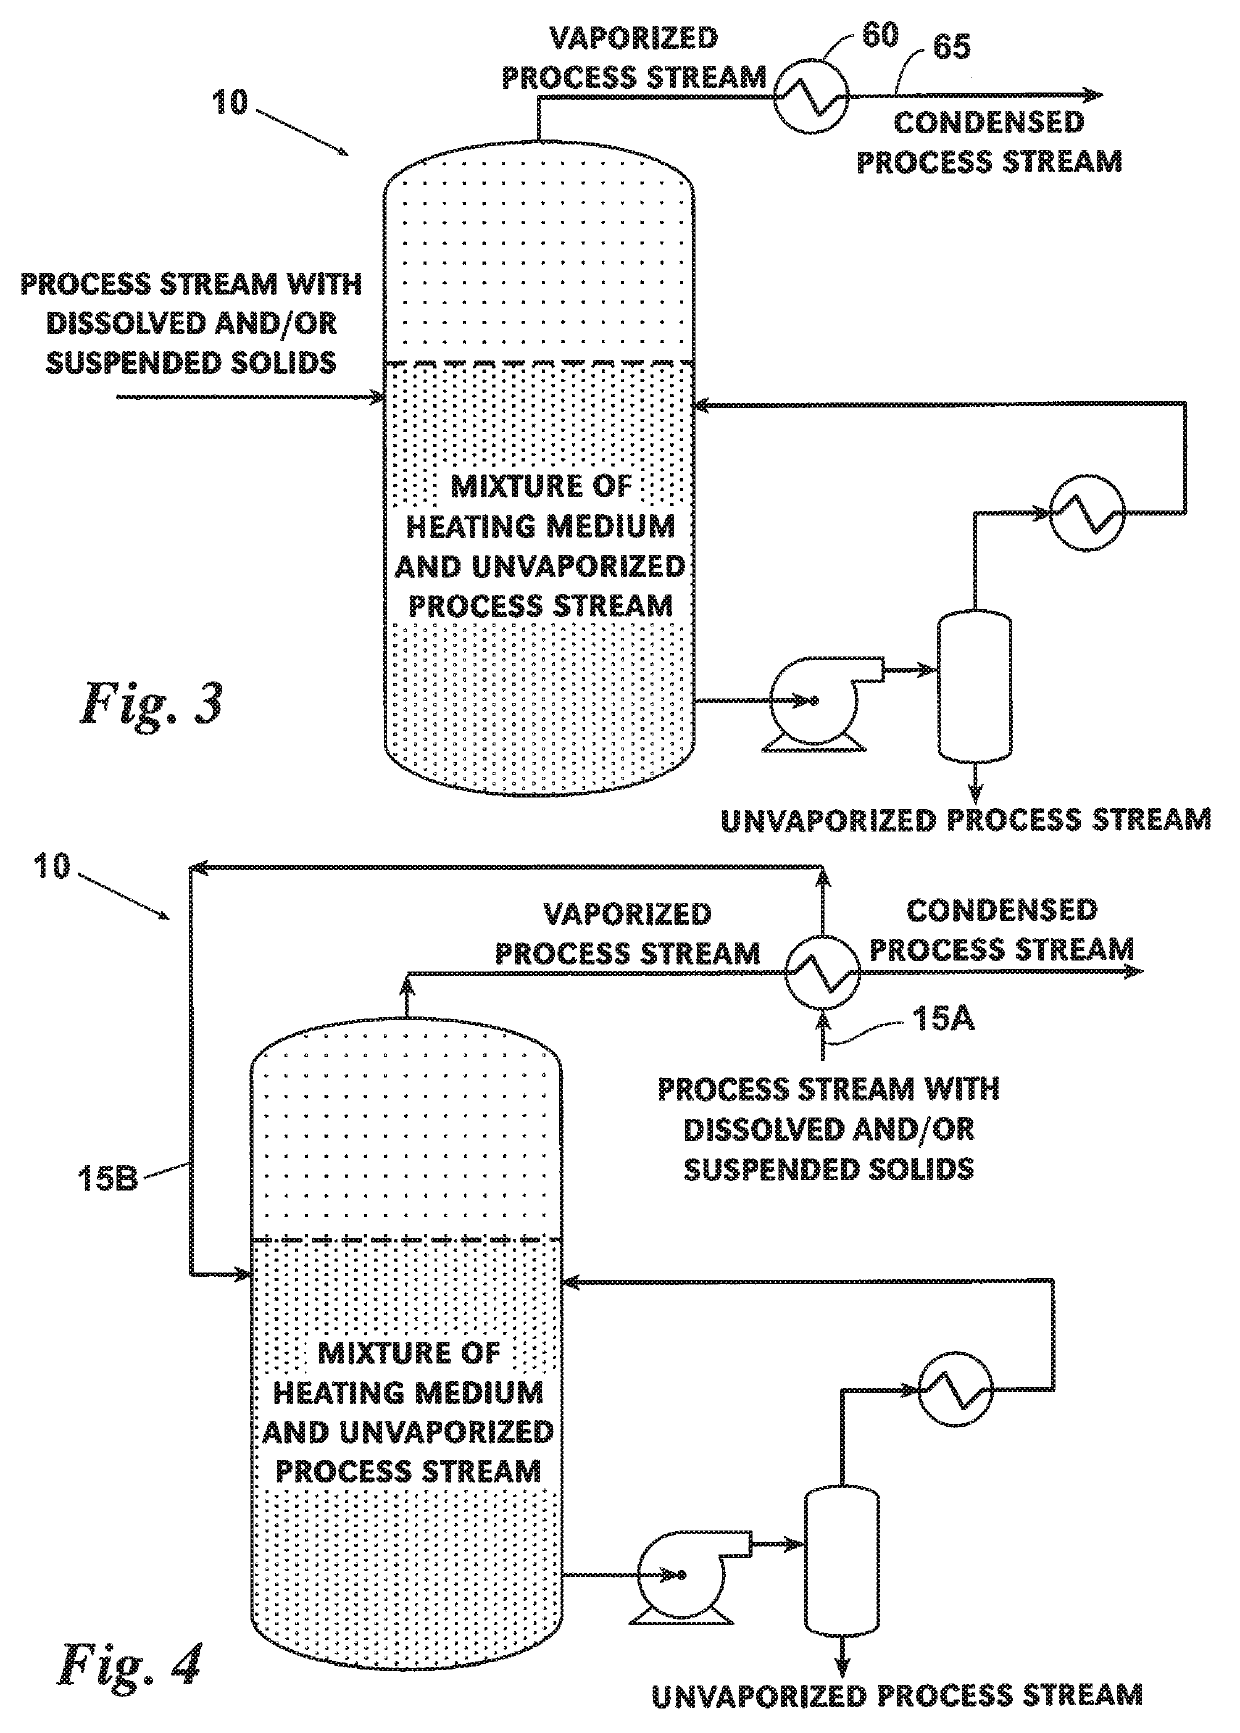 System And Method To Partially Vaporize A Process Stream By Mixing The Stream With A Heating Medium